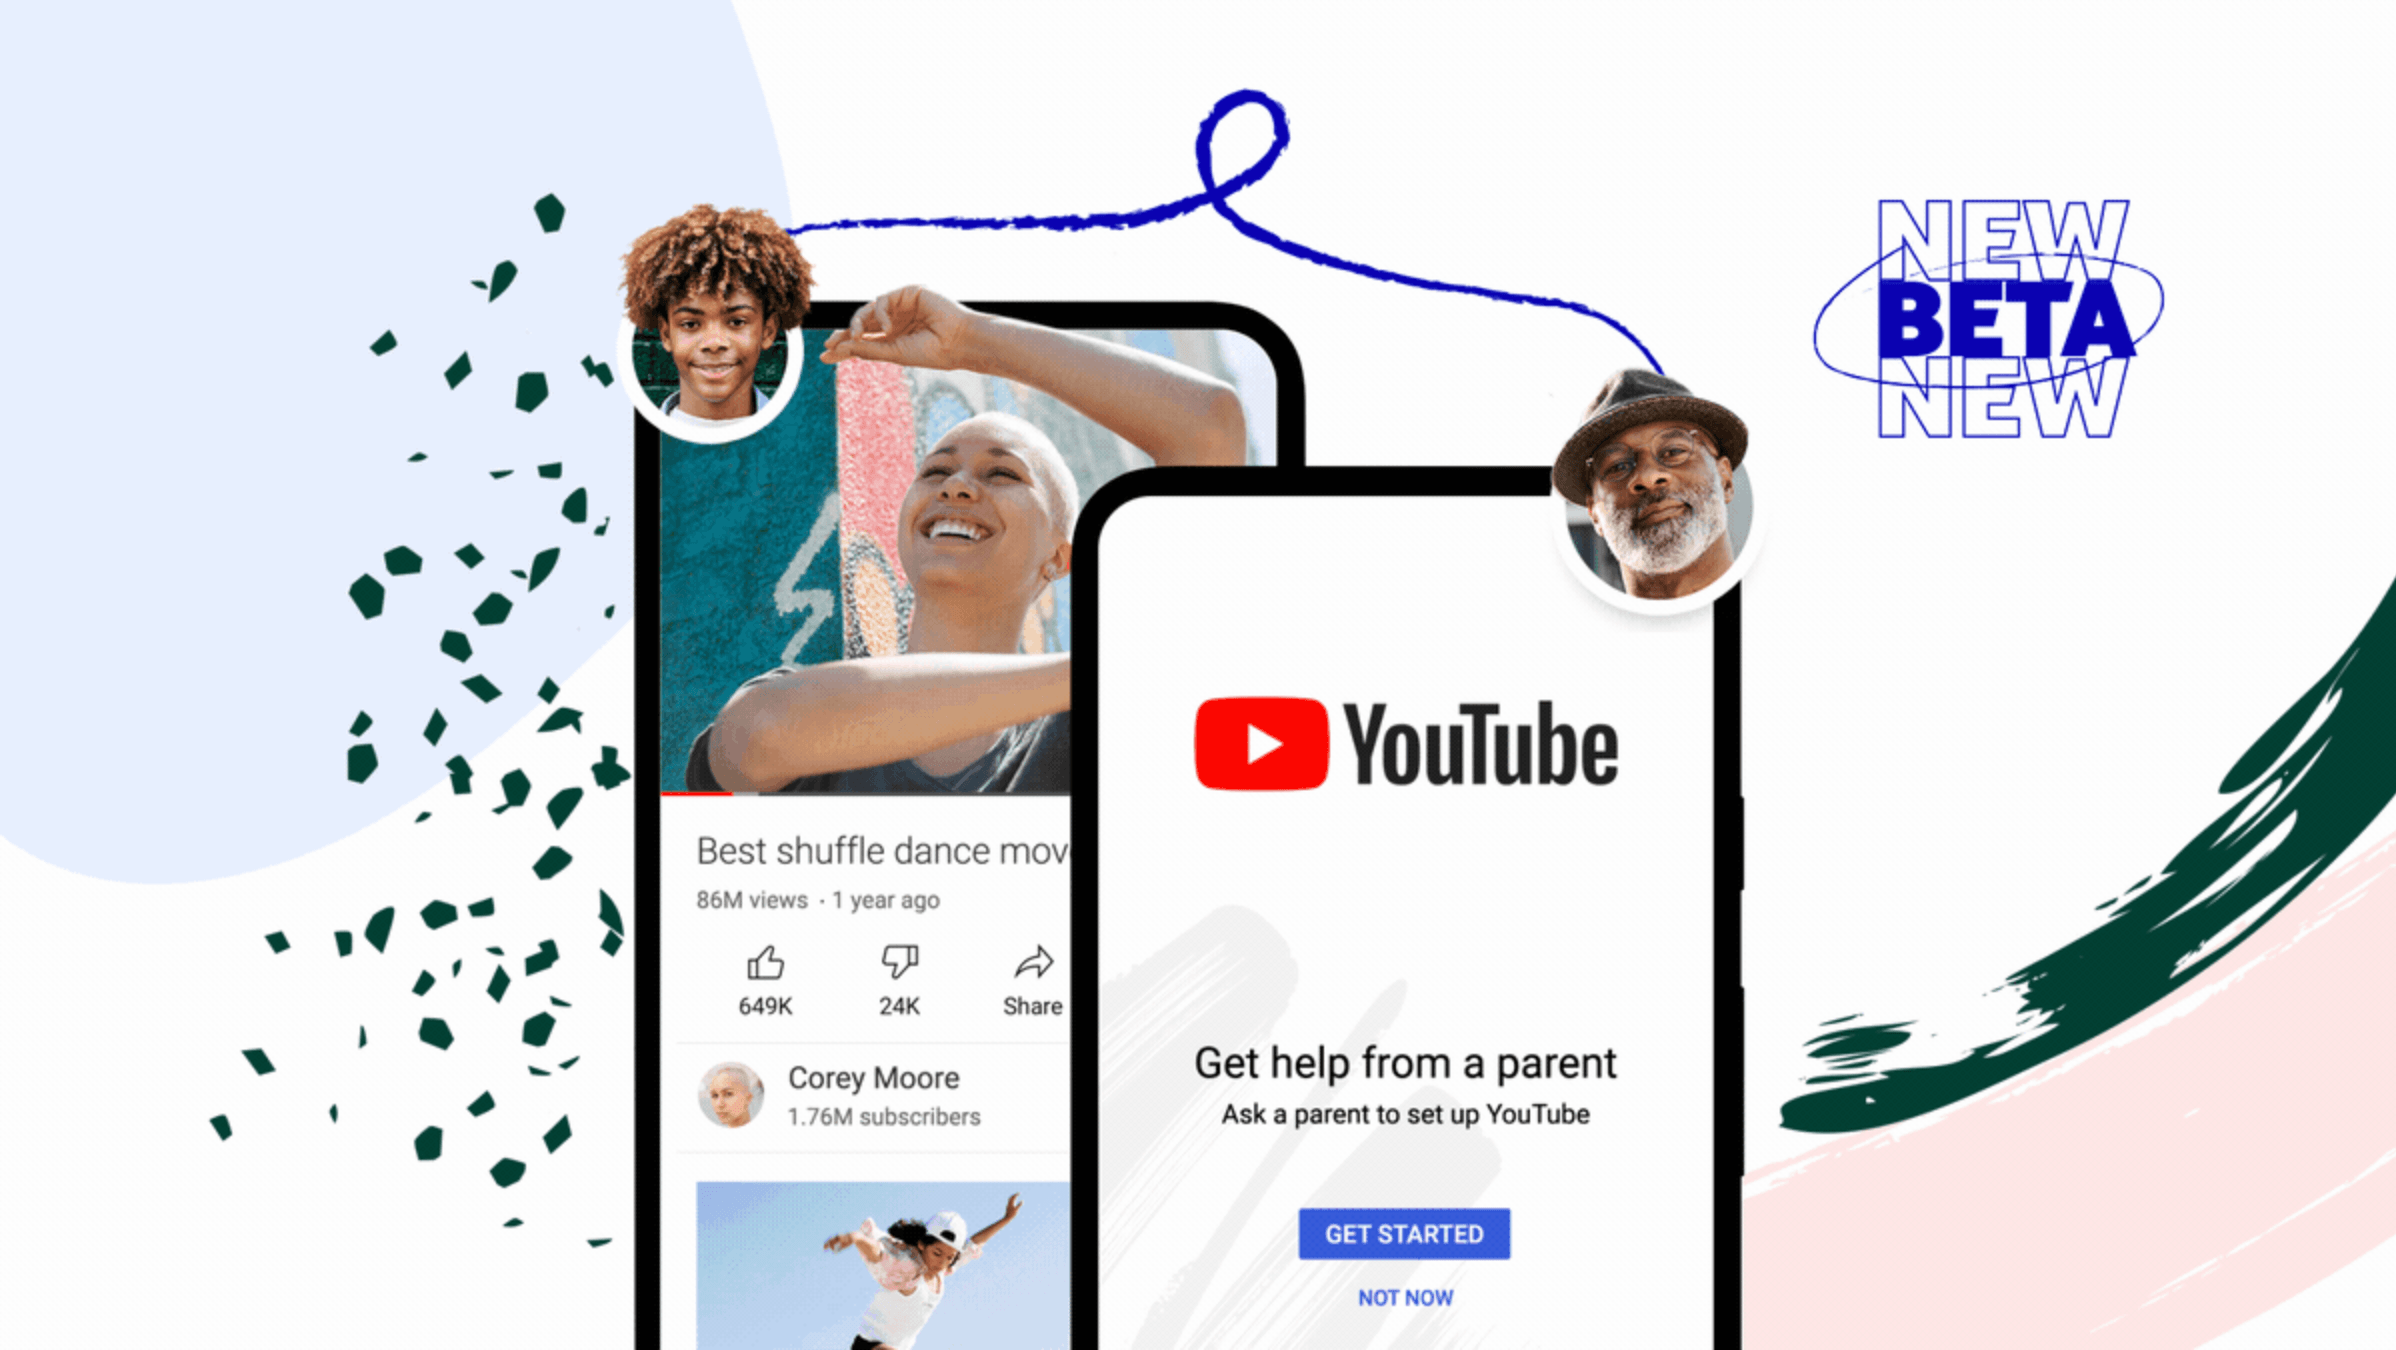 YouTube Will Introduce Supervised Accounts with Parental Controls for Teens and Tweens